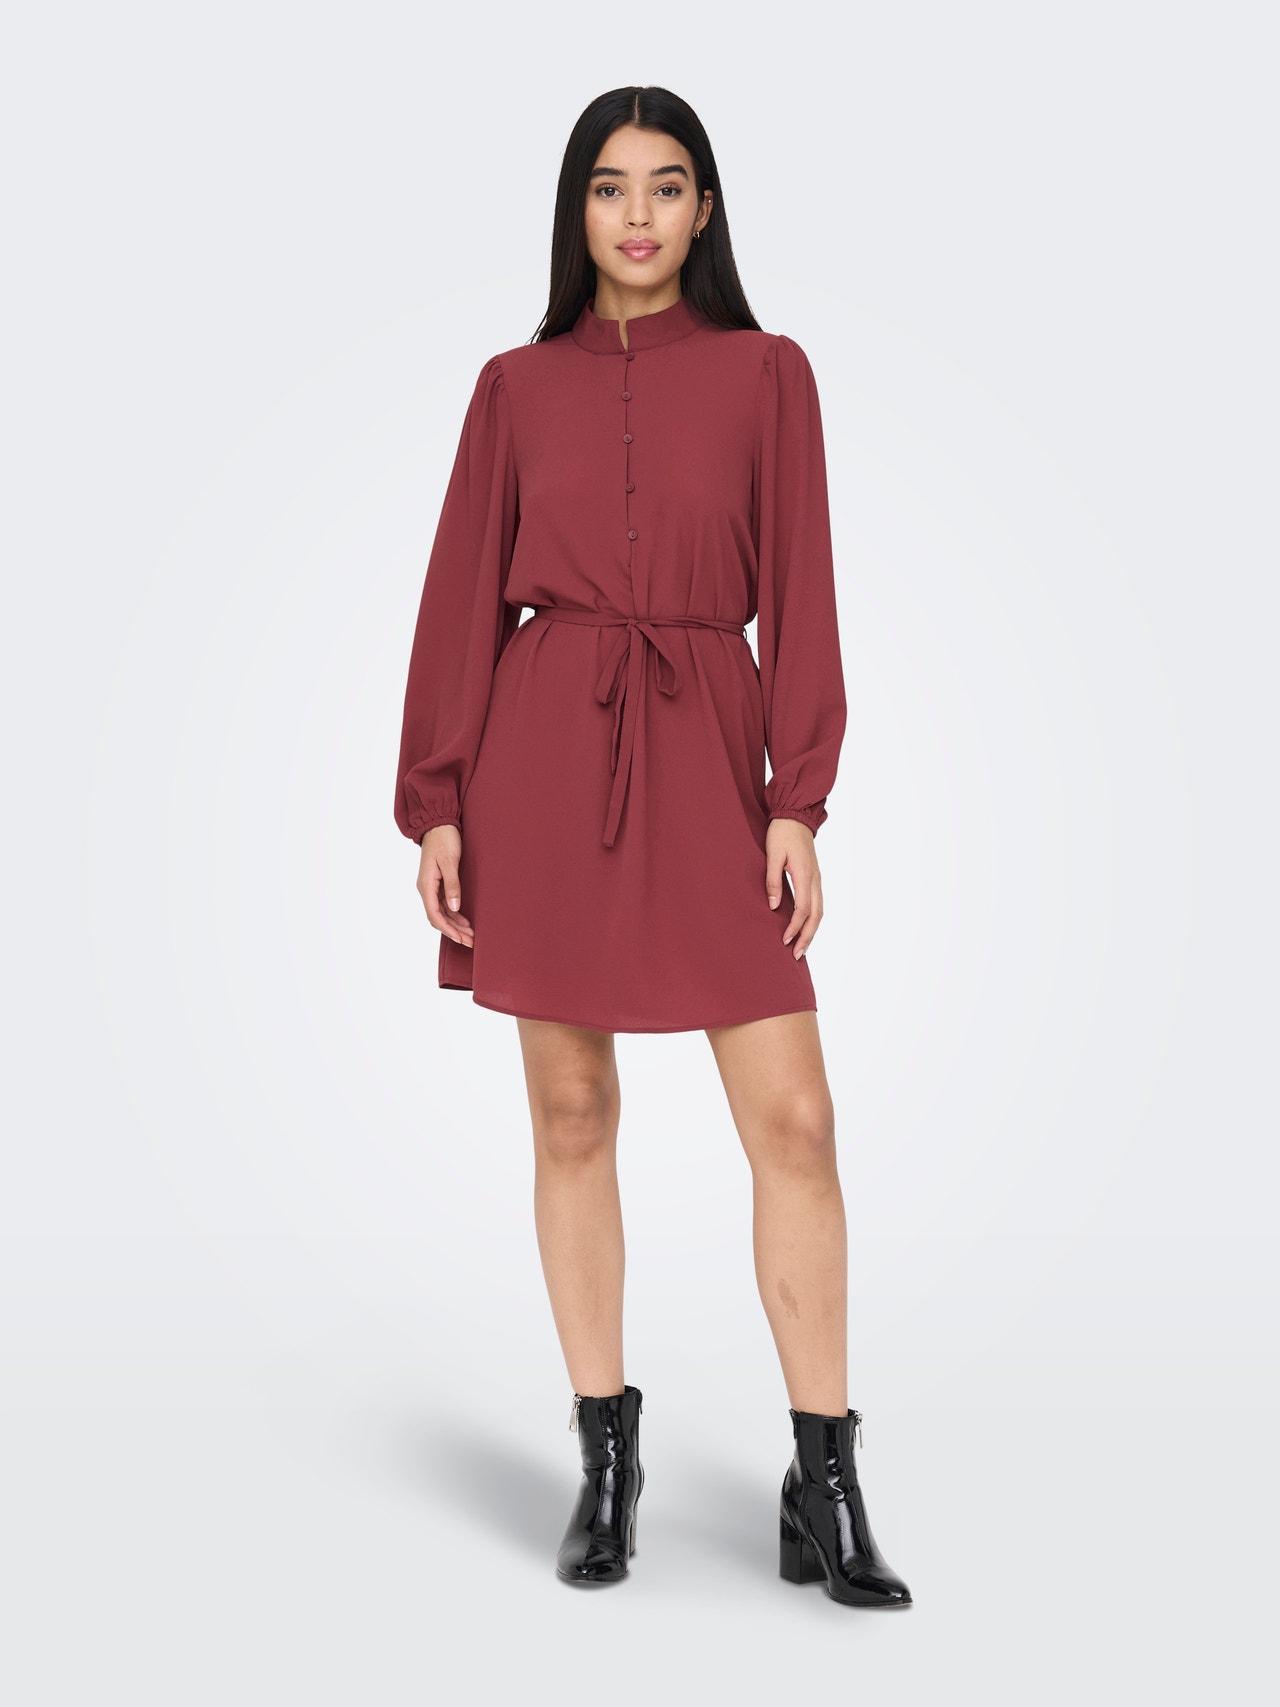 ONLY Robe courte Regular Fit Col mao -Oxblood Red - 15282546